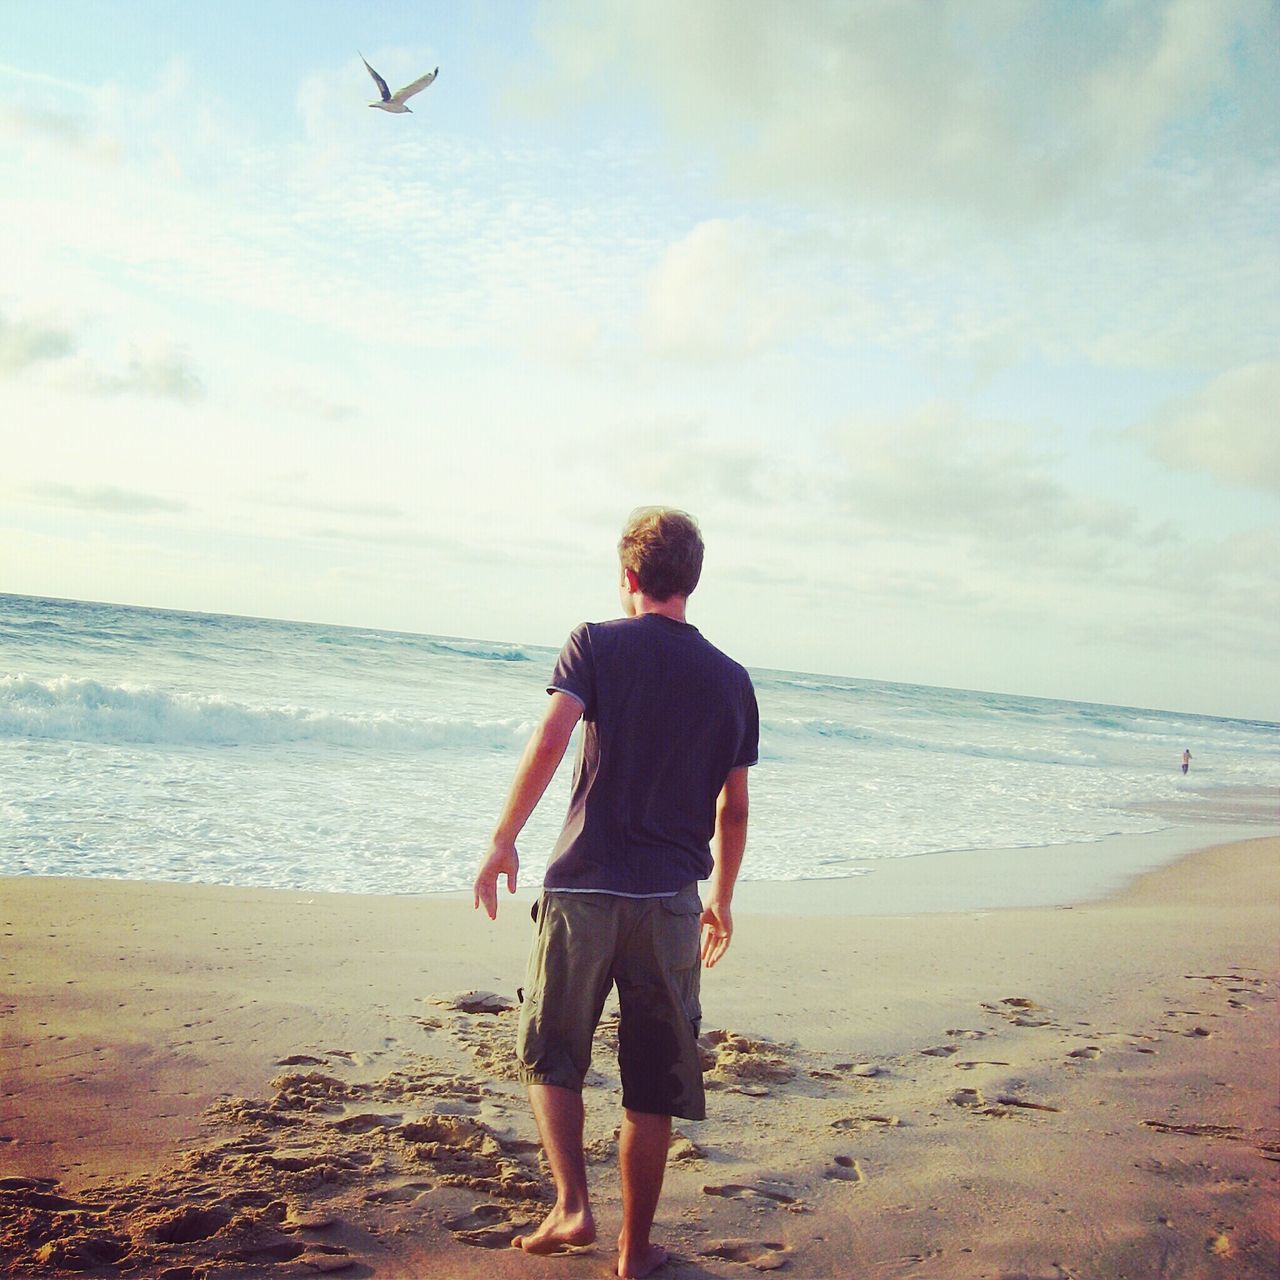 REAR VIEW OF MAN STANDING ON BEACH AGAINST SKY